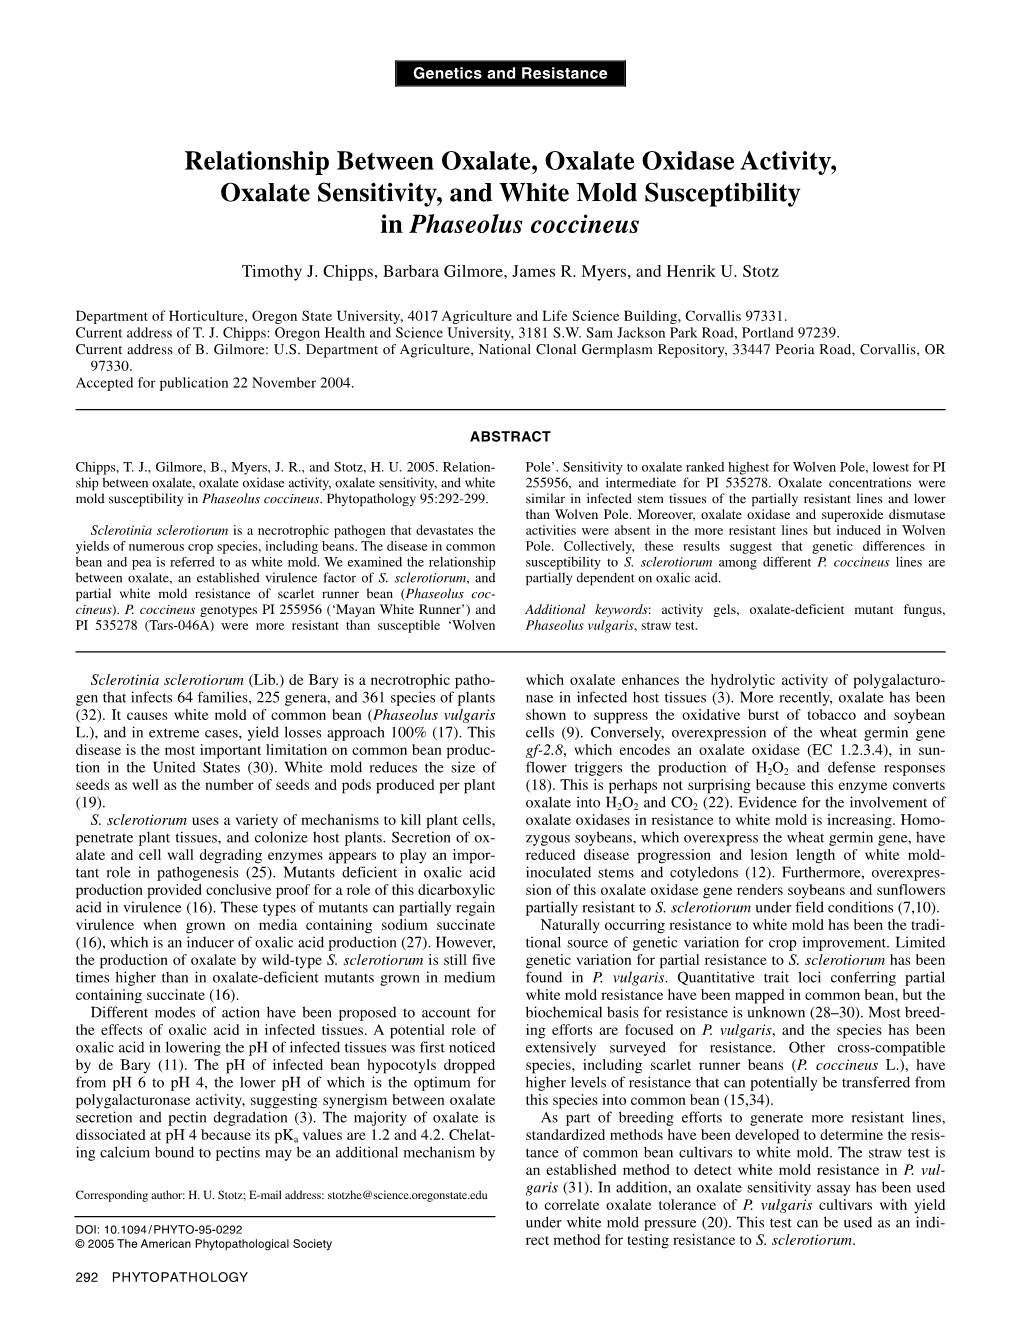 Relationship Between Oxalate, Oxalate Oxidase Activity, Oxalate Sensitivity, and White Mold Susceptibility in Phaseolus Coccineus